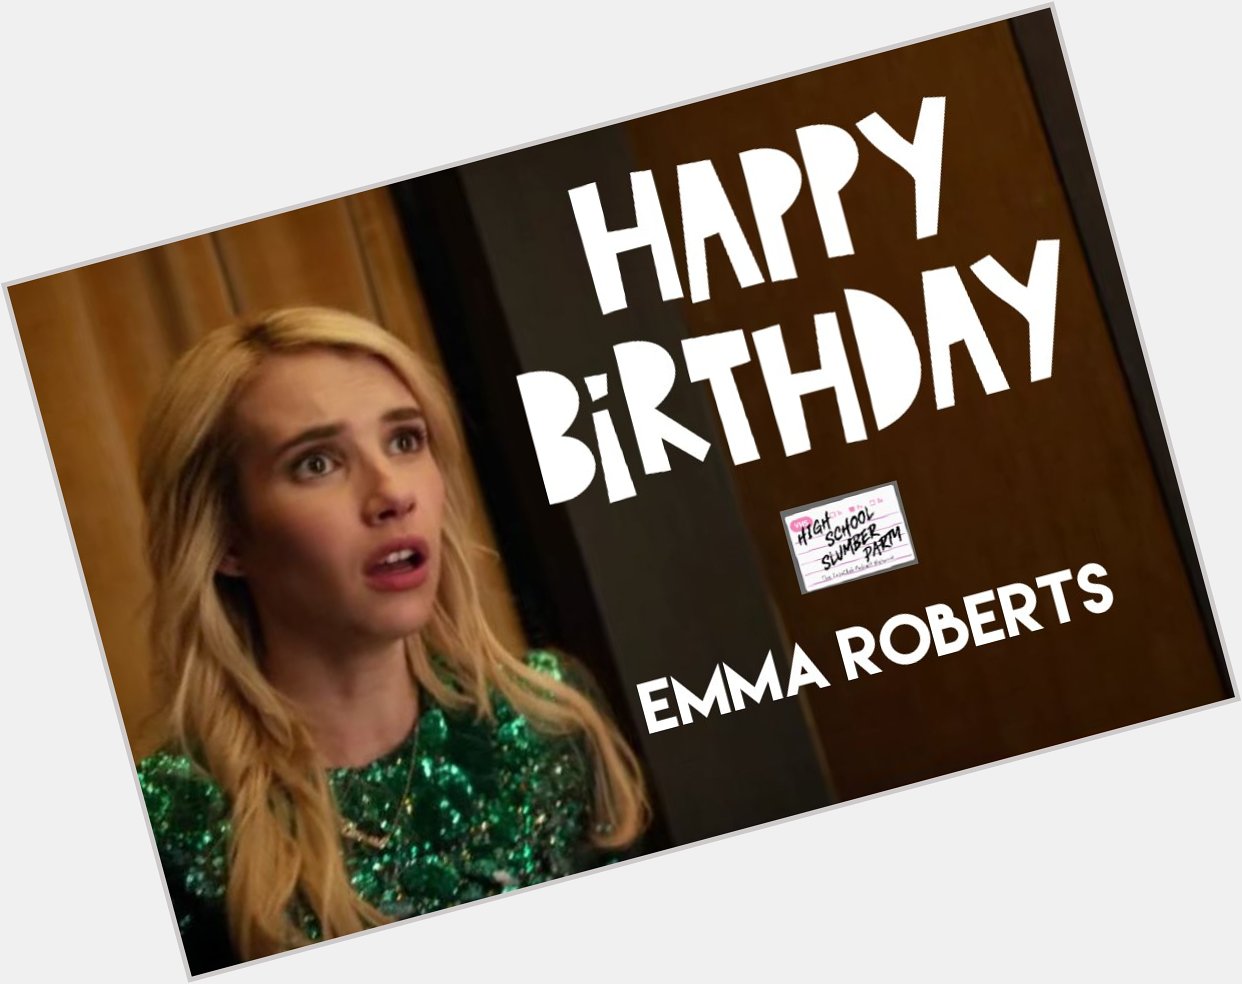 Happy Birthday Emma Roberts! did you pick Nerve this week to celebrate? 